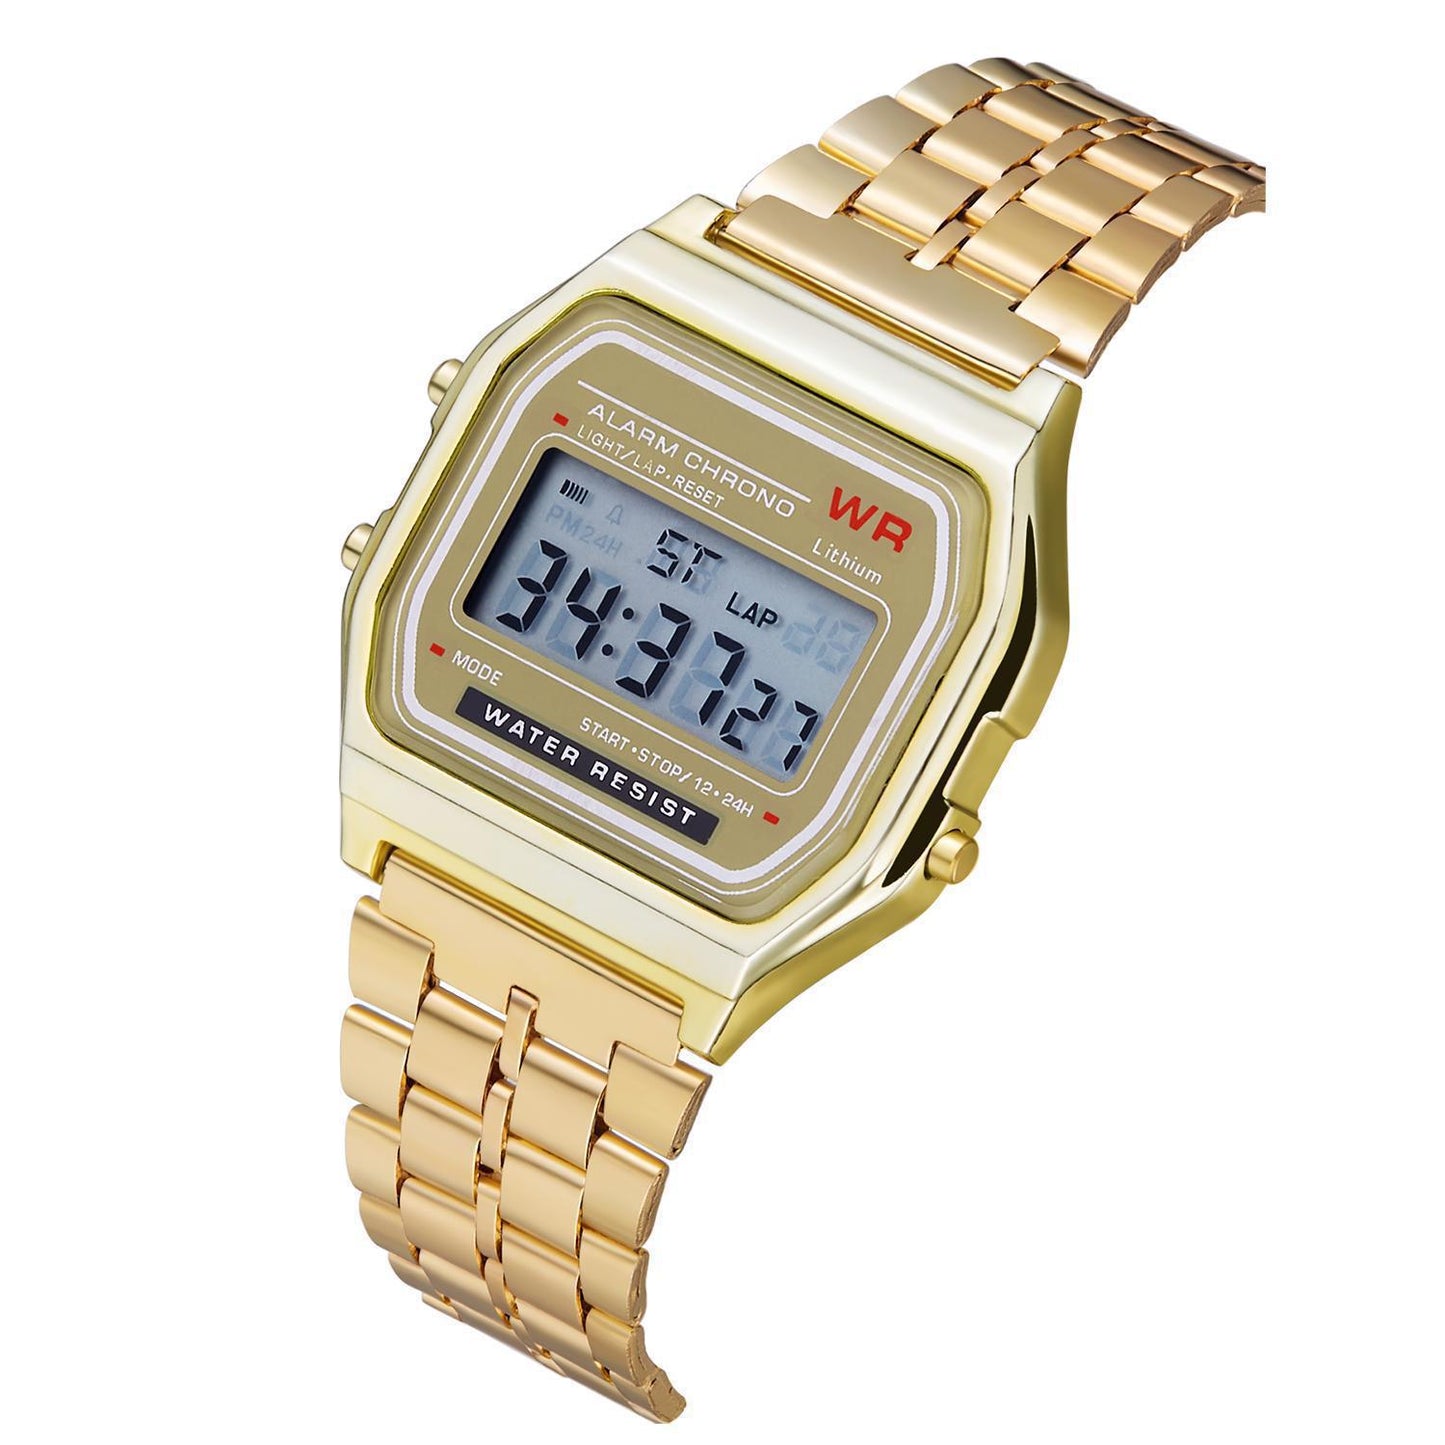 WR Steel Band Electronic Watch